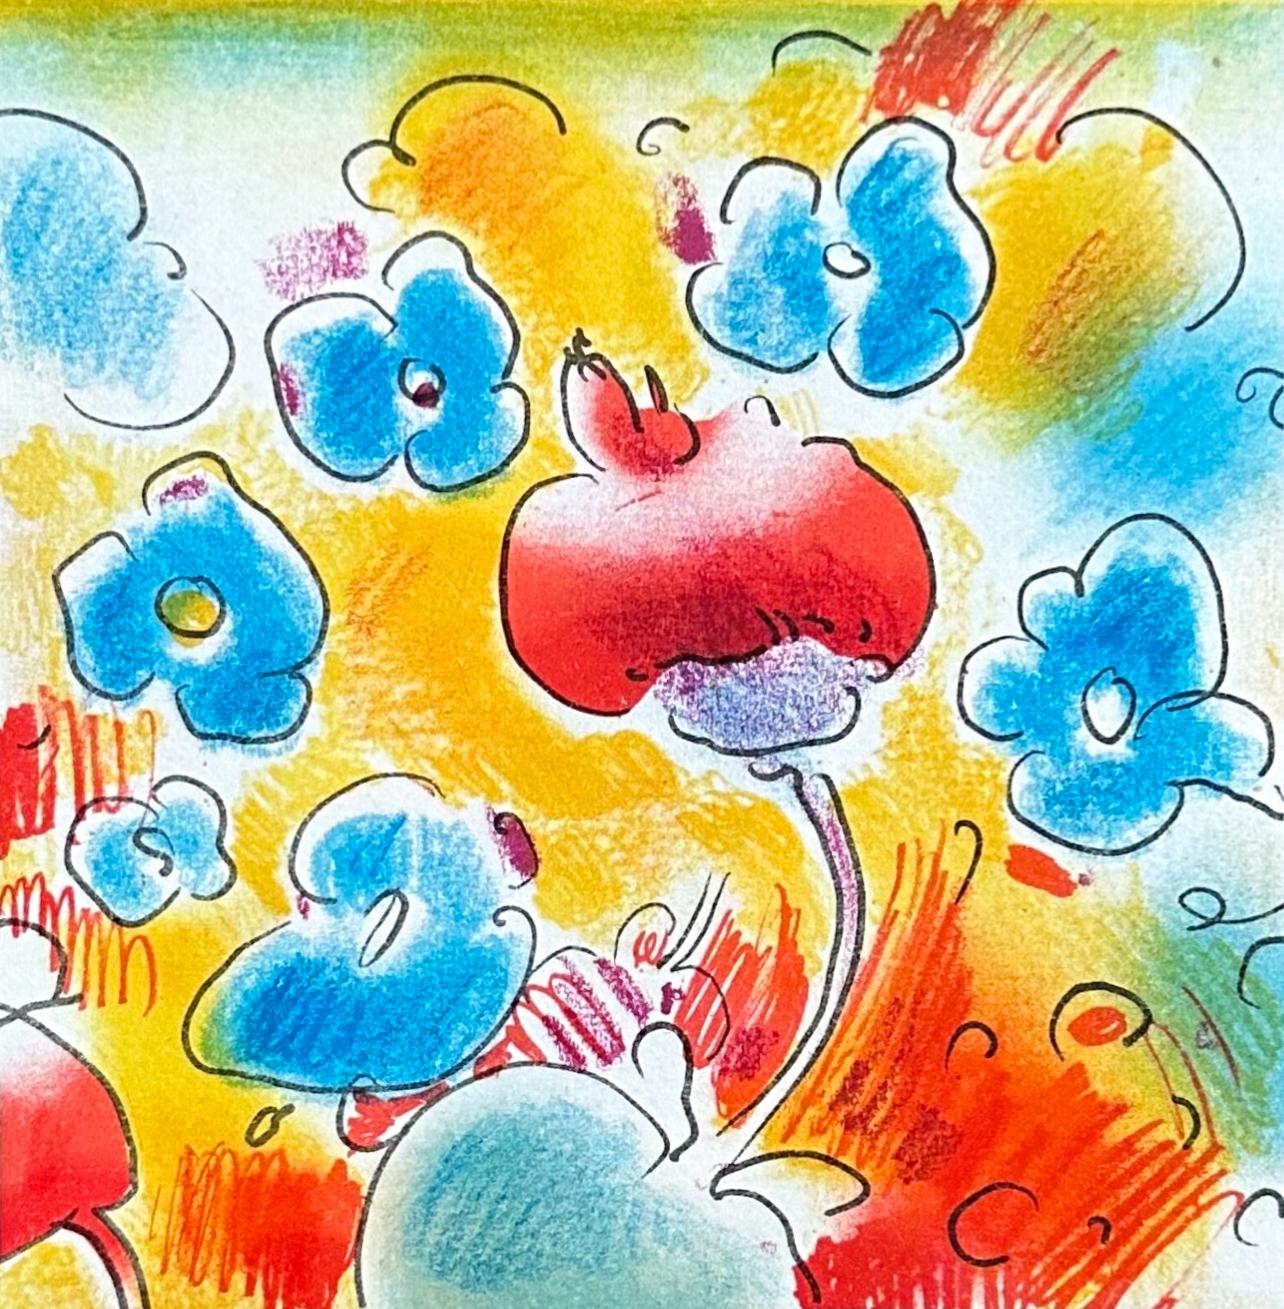 Artist: Peter Max (1937)
Title: Spring
Year: 1982
Medium: Unique, mixed media with lithography and hand coloring on Arches paper
Size: 6.25 x 5.25 inches
Condition: Excellent
Inscription: Signed by the artist

PETER MAX (1937- ) Peter Max has